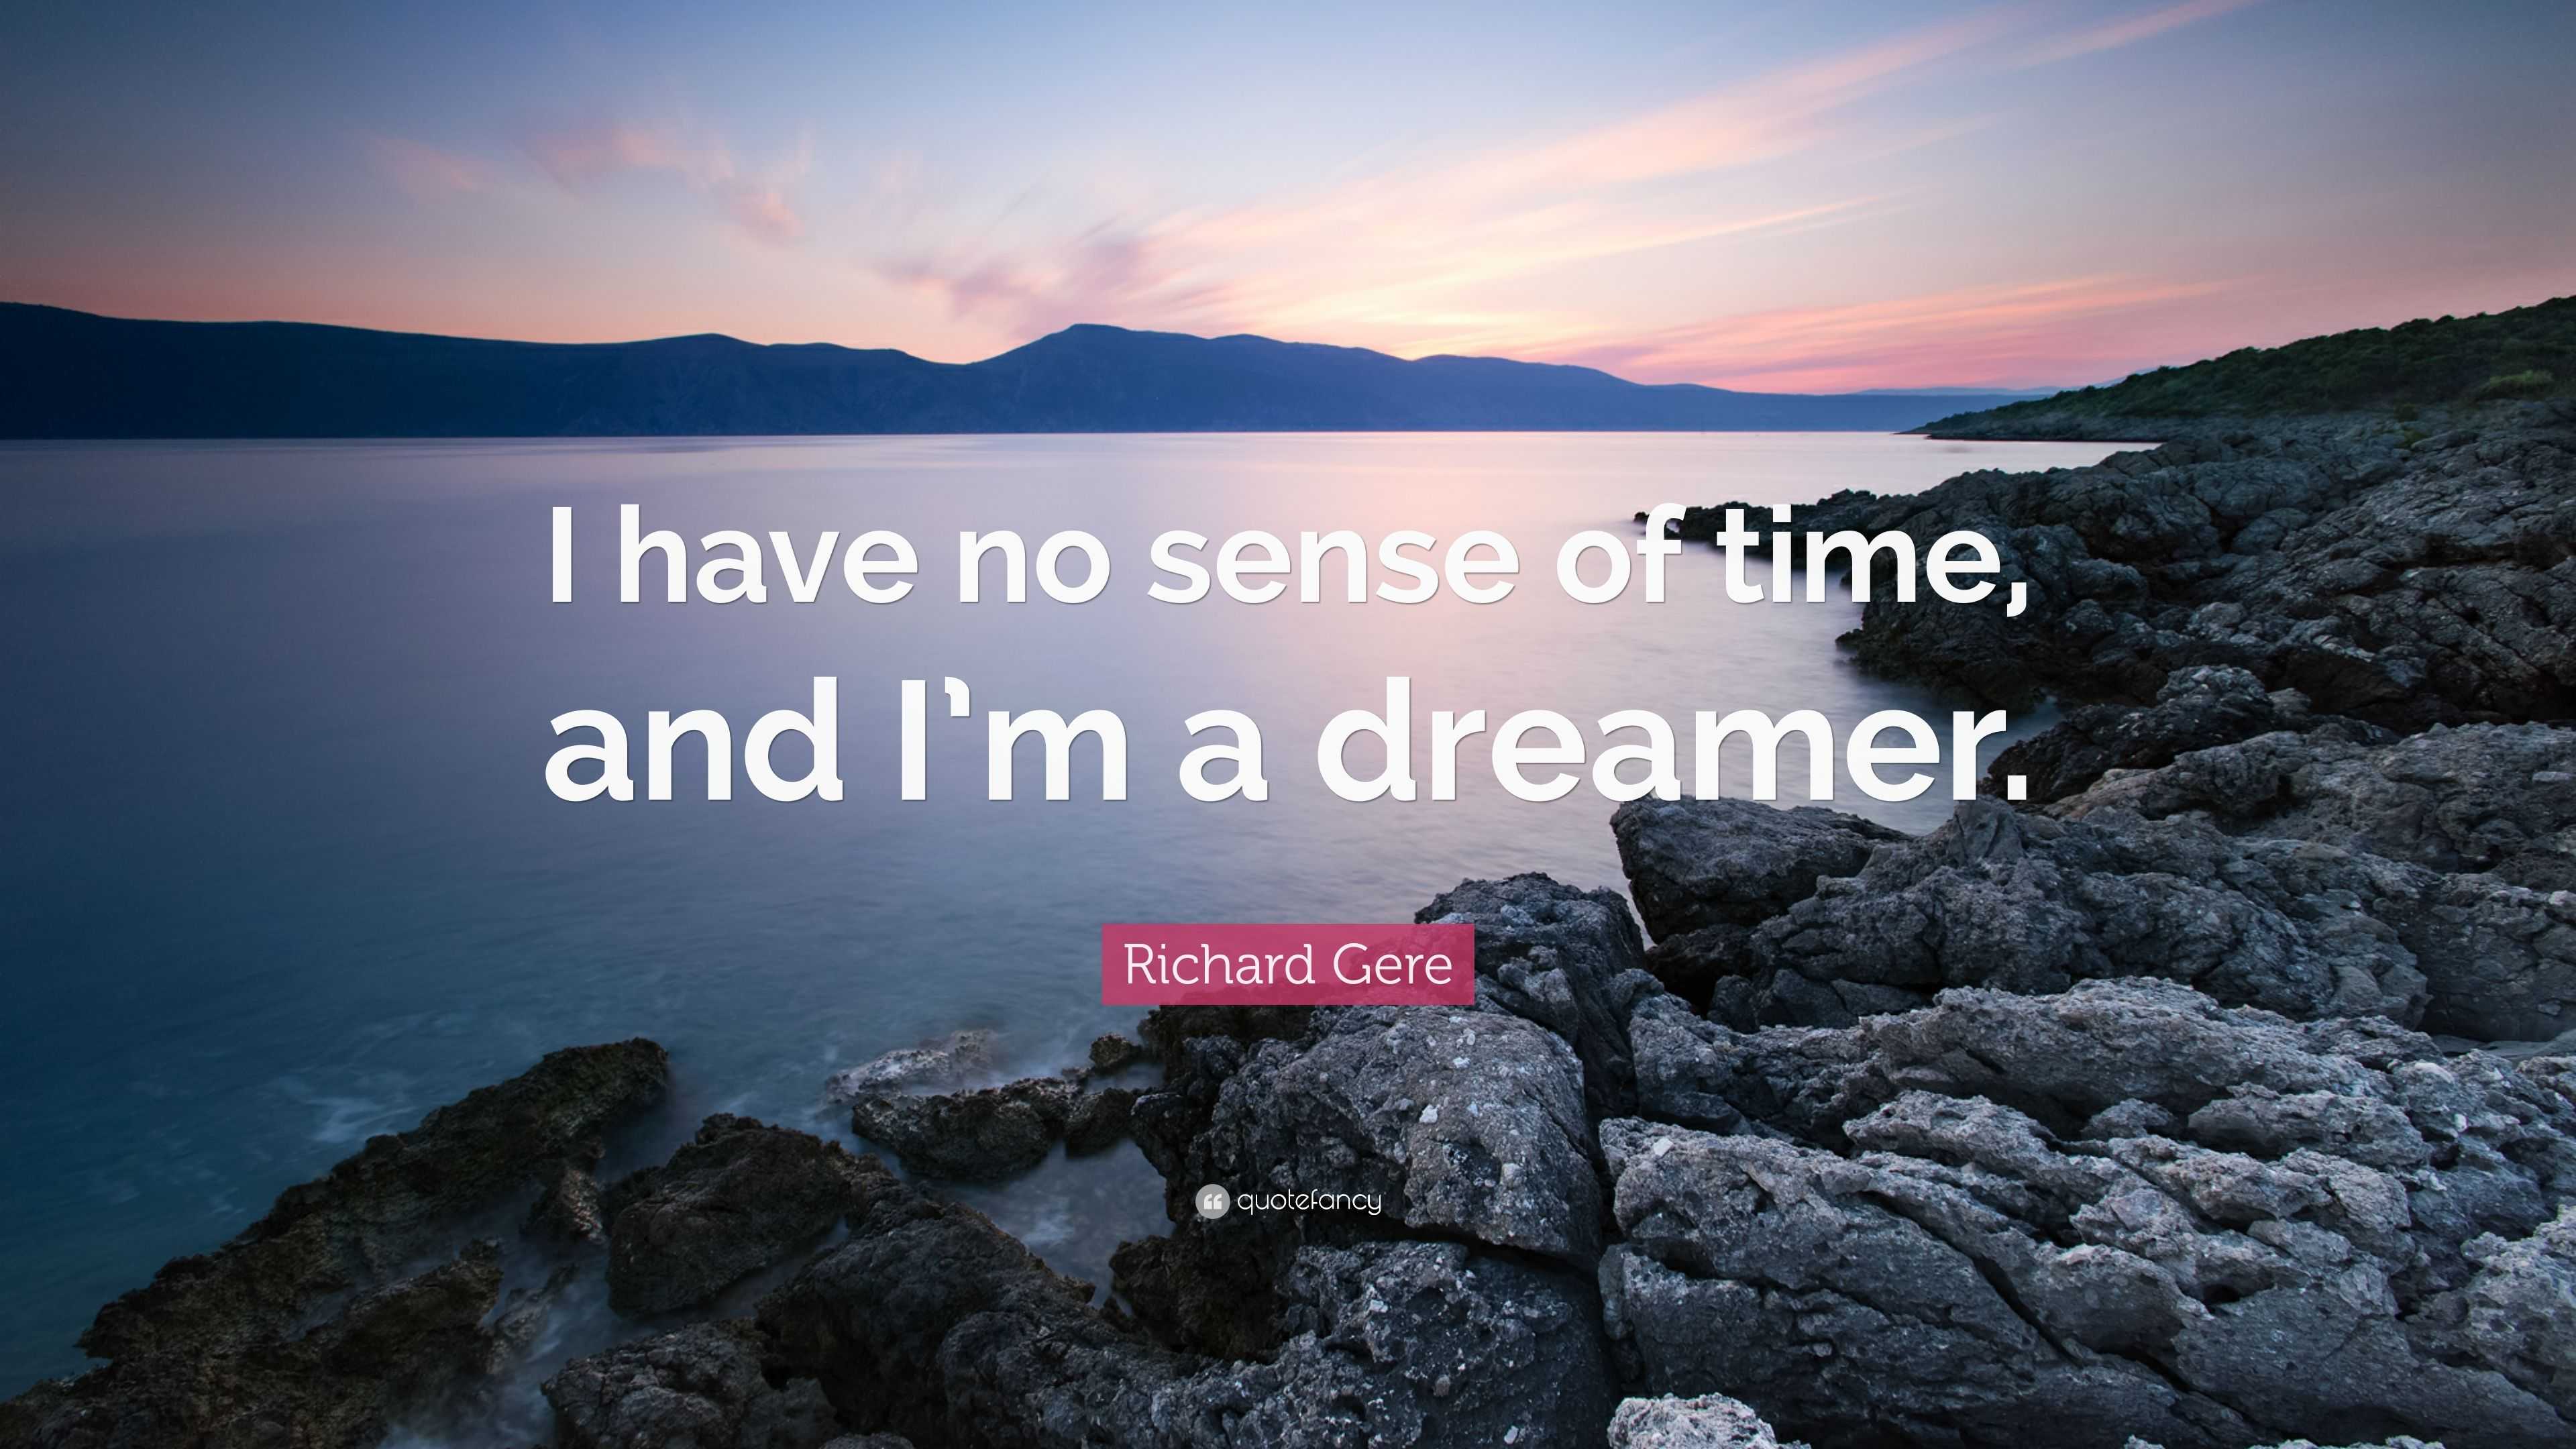 Richard Quote: “I have sense of time, and I'm a dreamer.”